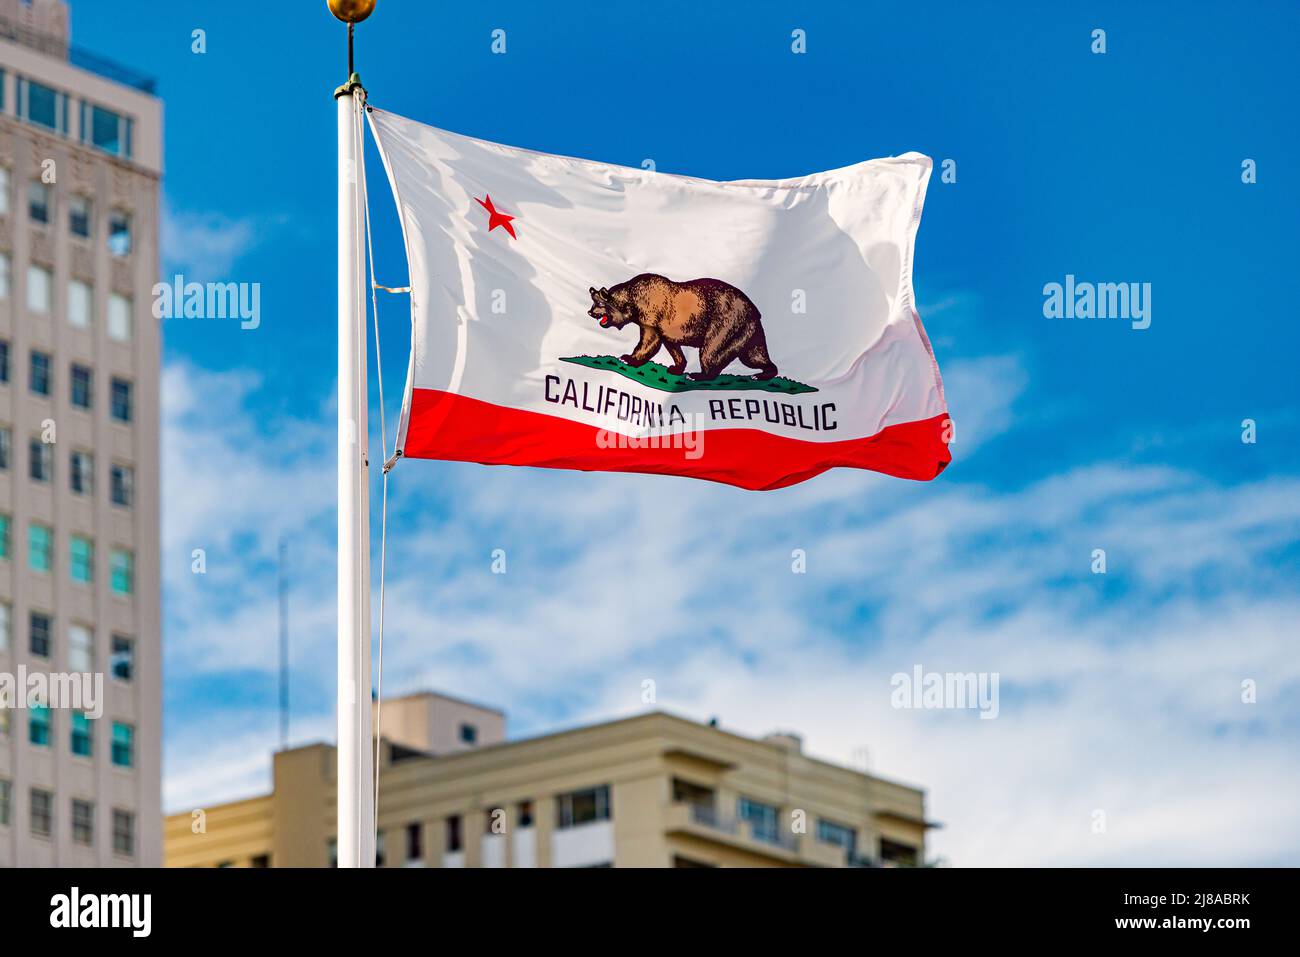 Flag of California Republic in San Francisco. Blue sky with clouds in background. Stock Photo